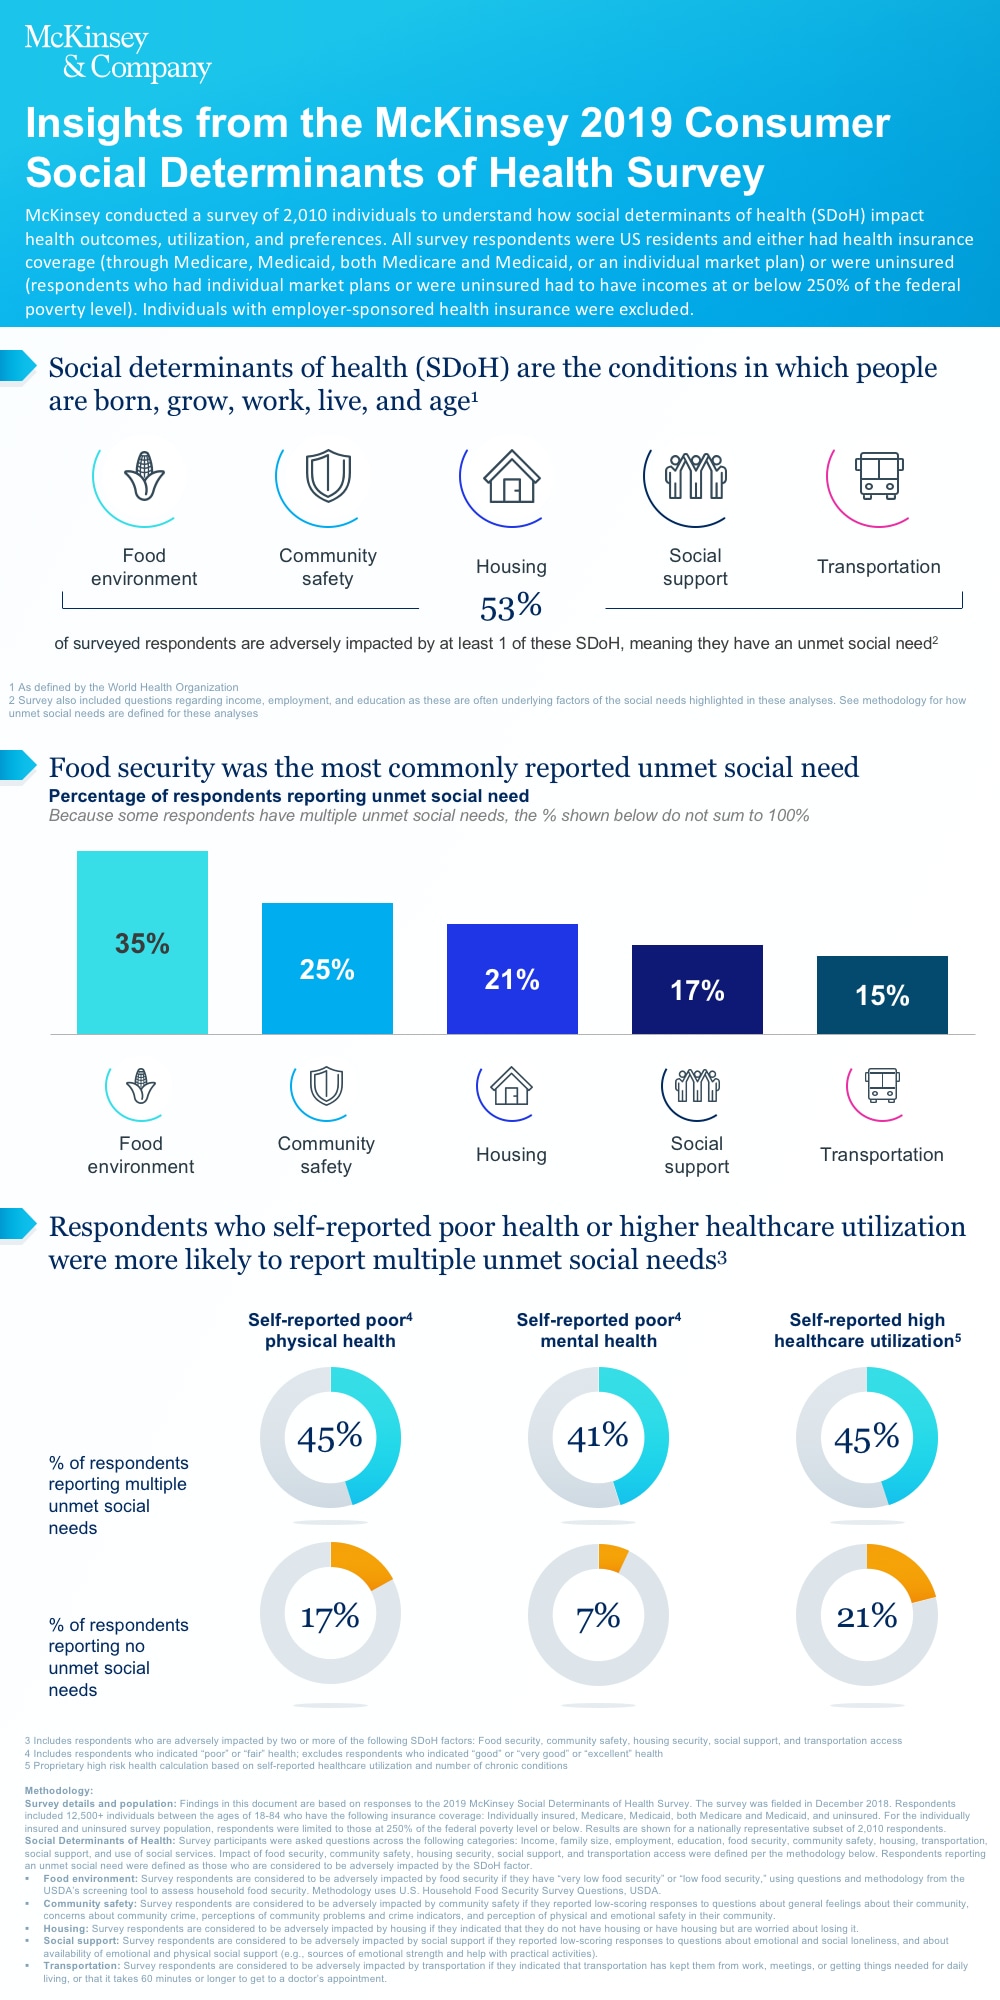 Insights from the McKinsey 2019 Social Determinants of Health Survey